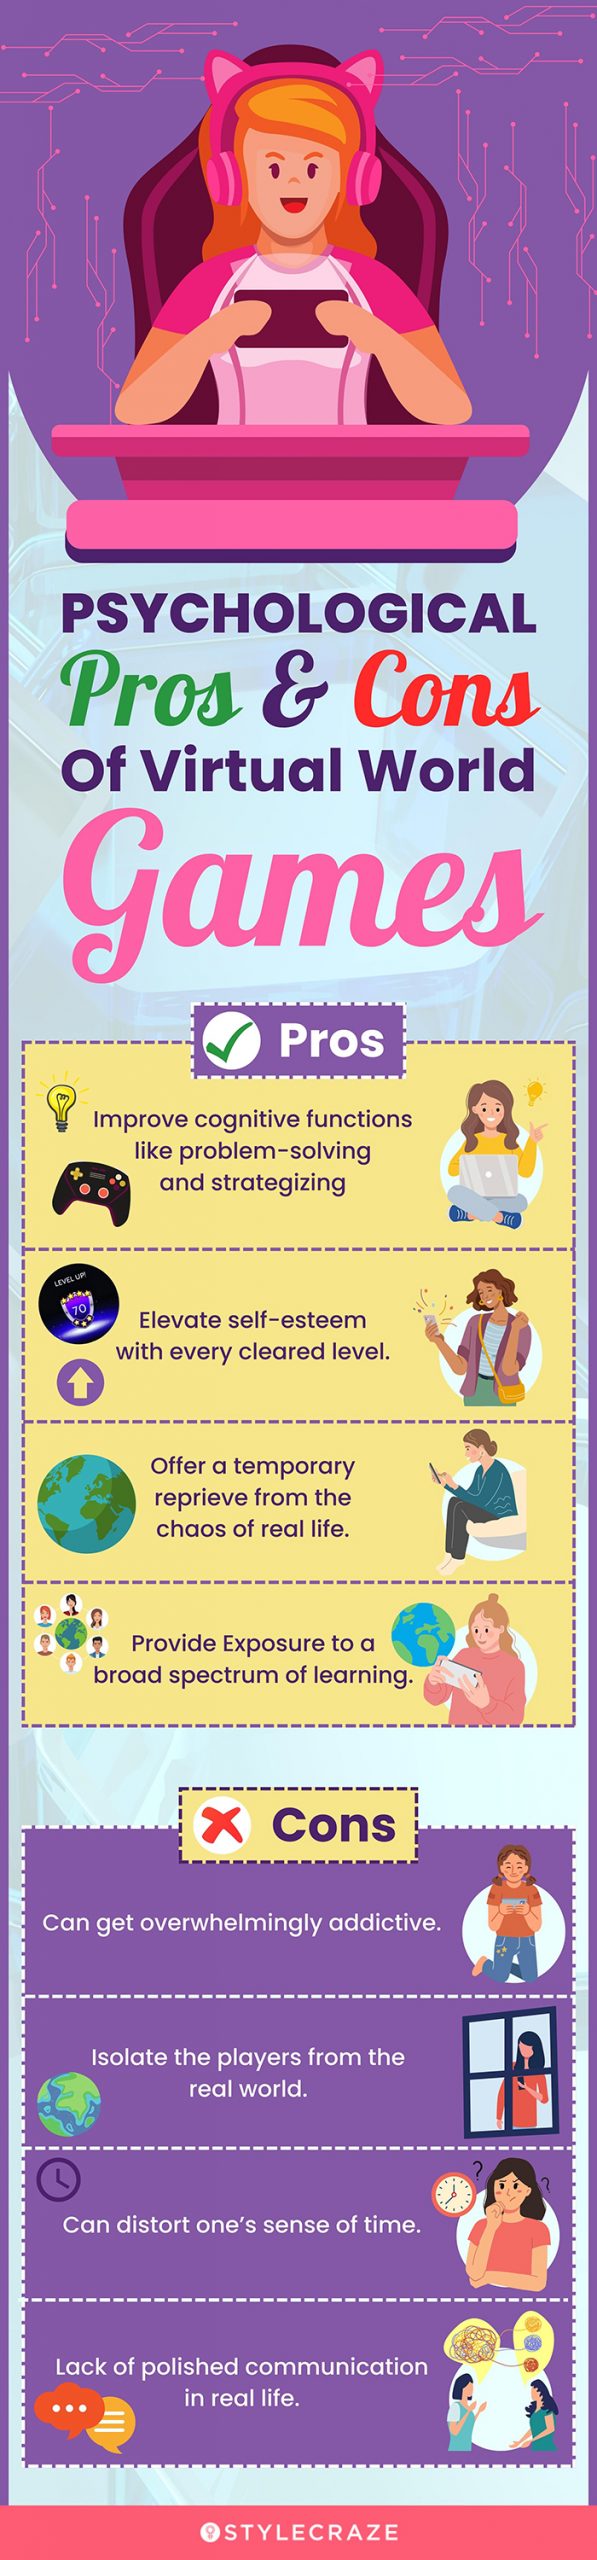 psychological pros & cons of virtual world game (infographic)